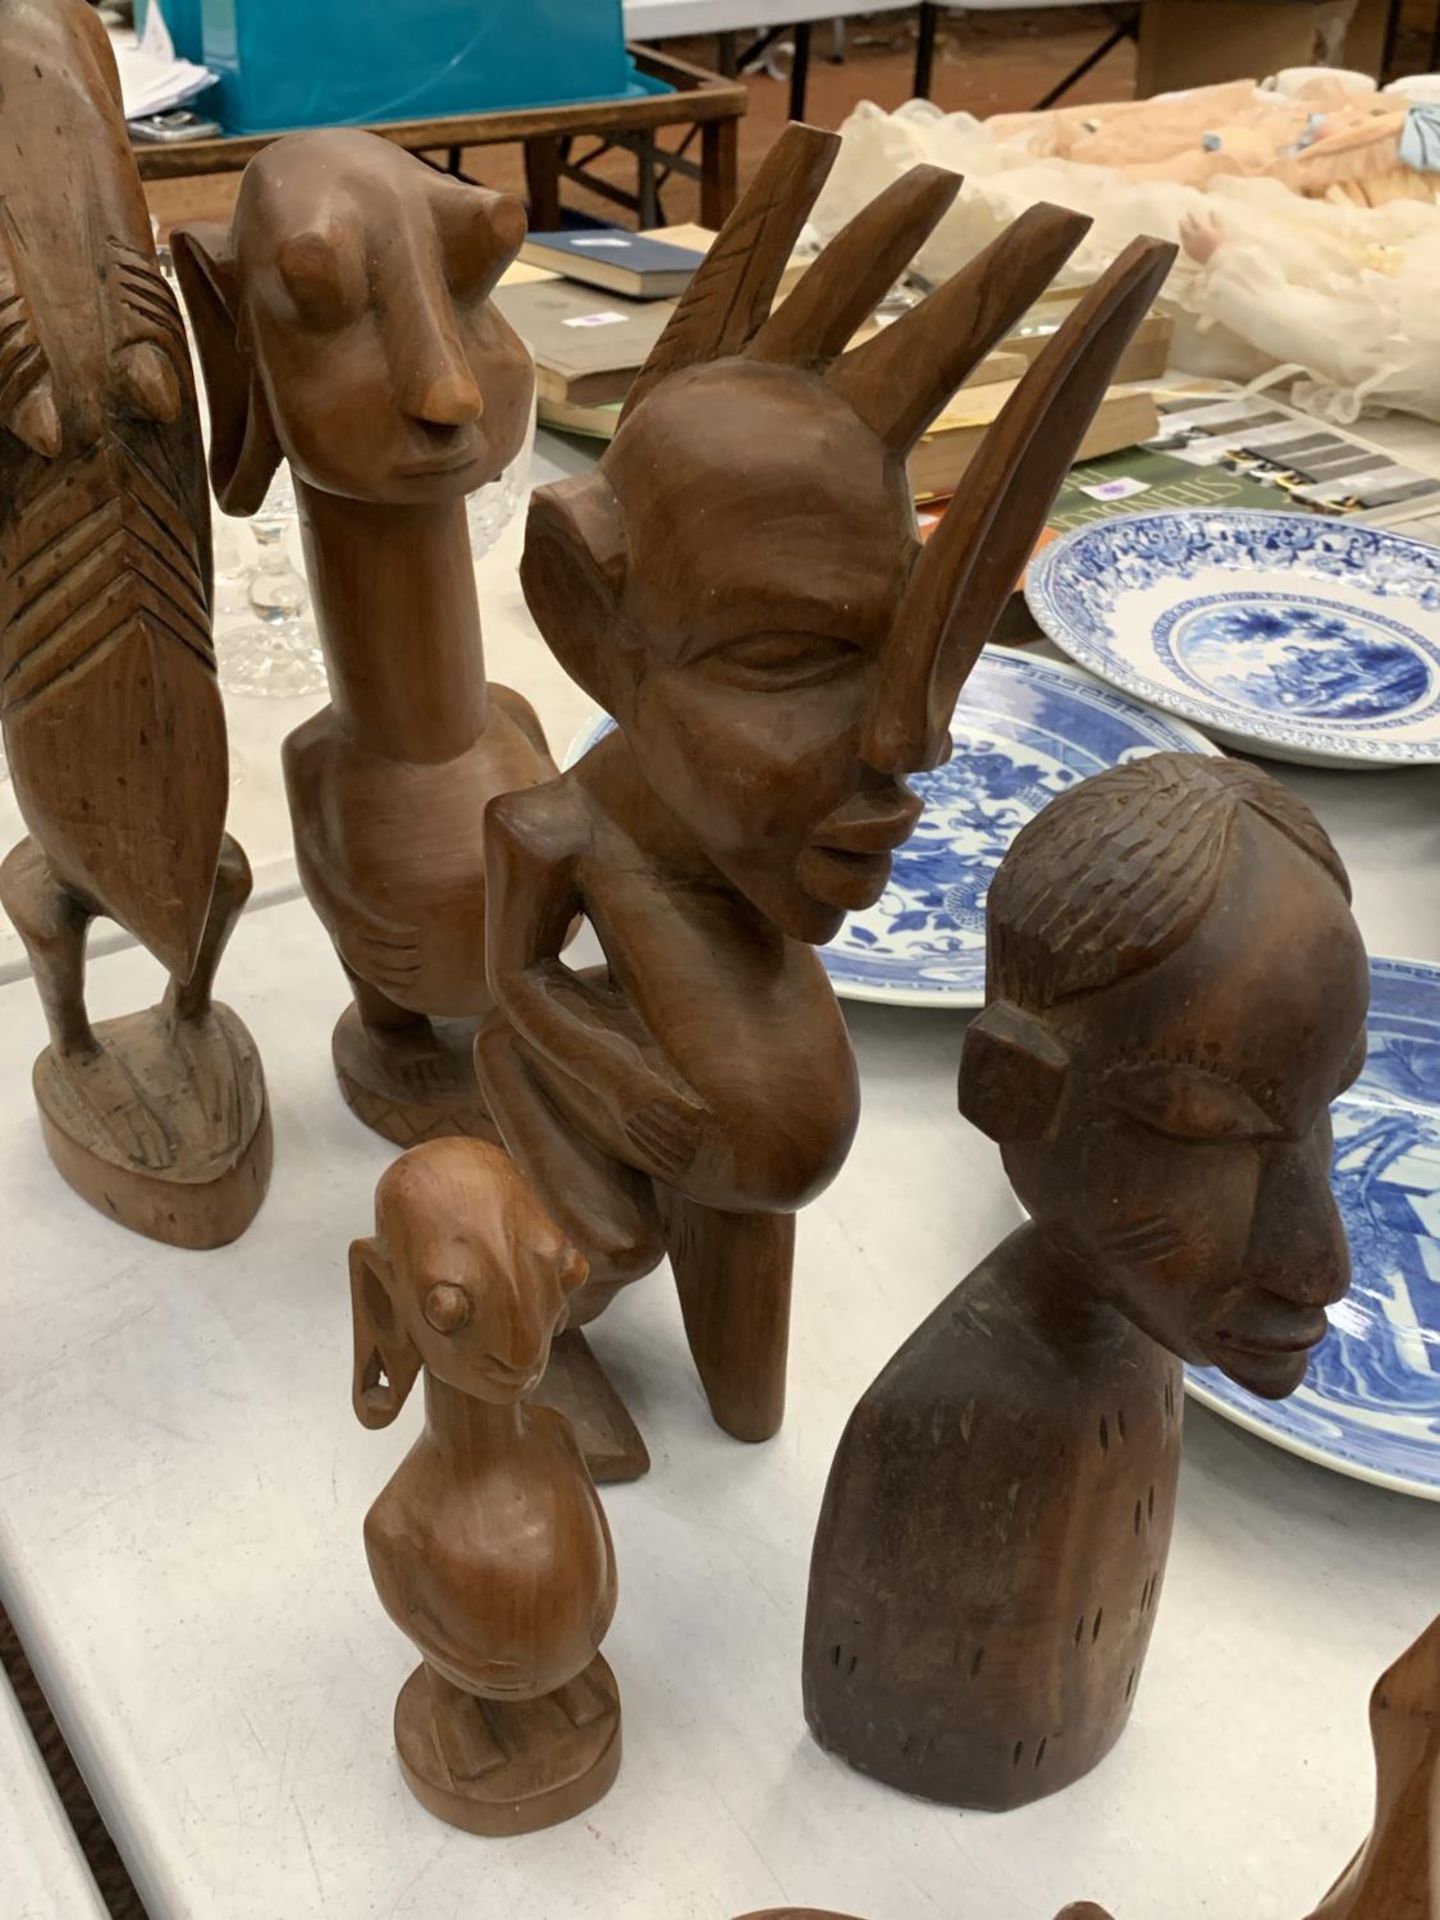 SEVERAL AFRICAN HAND SCULPTURED FIGURES - Image 3 of 5